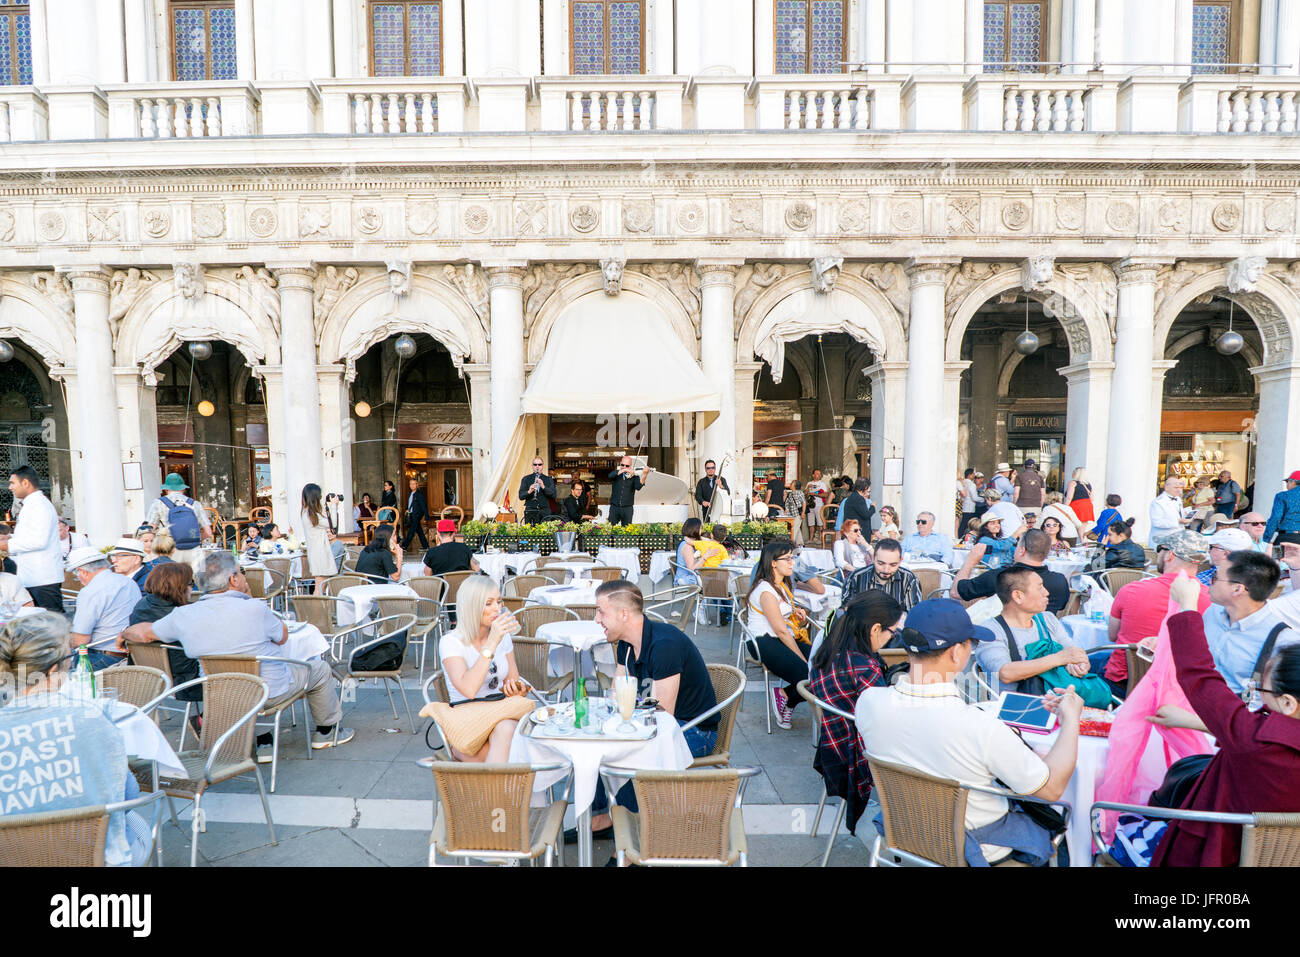 Venice, Veneto / Italy. May 21, 2017: Terraces with drinking people and musicians playing at the Great Cafe Chioggia in St. Mark's Square Stock Photo